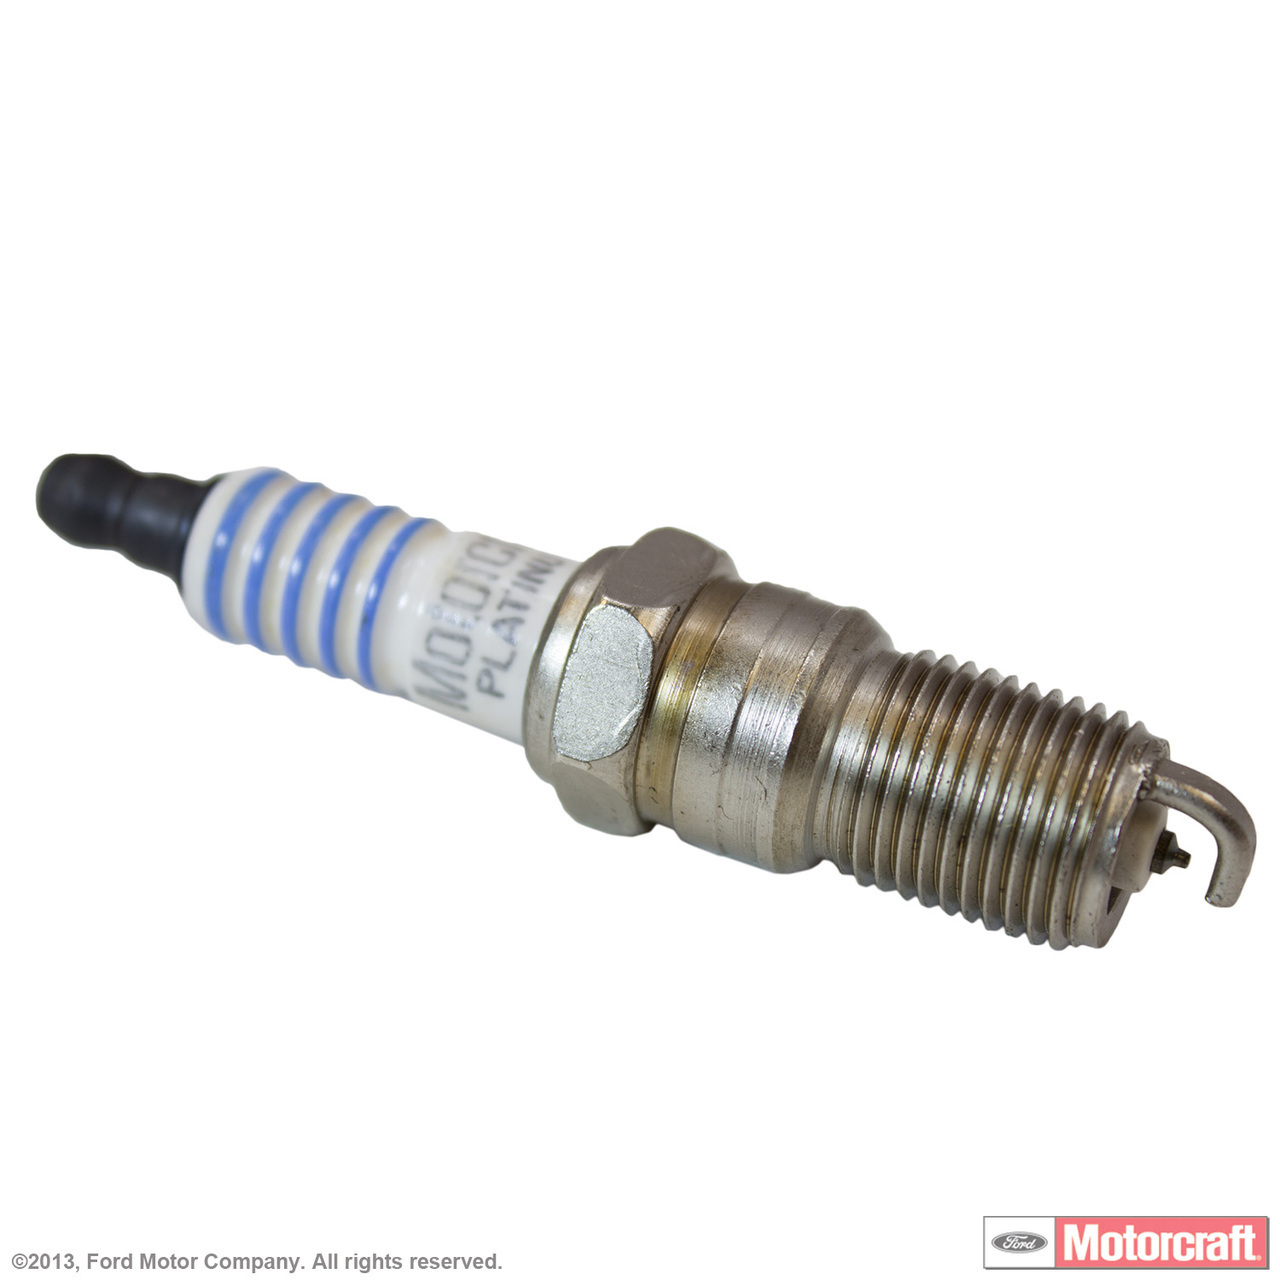 Ford ranger recommended spark plugs #8